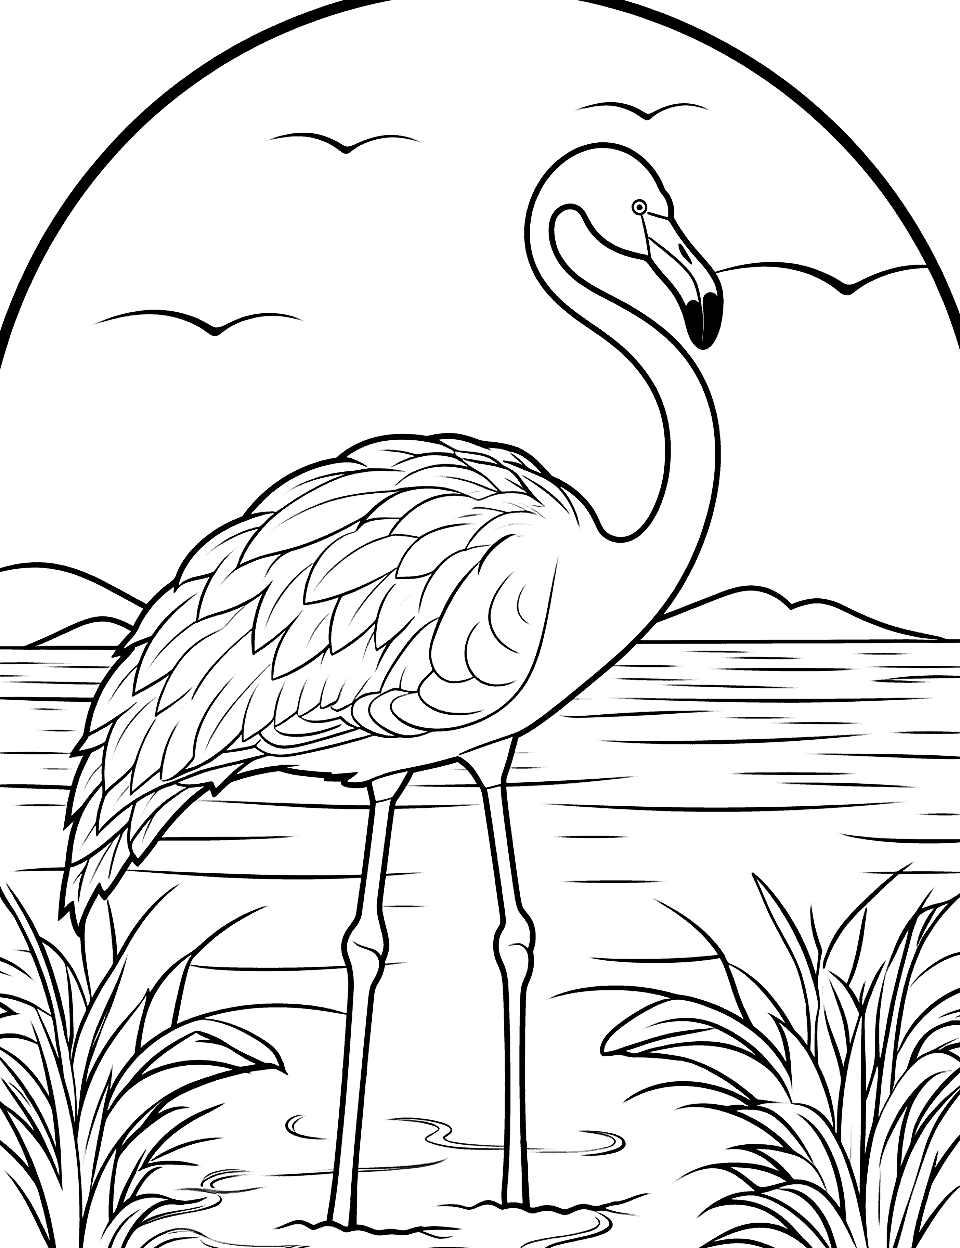 Flamingo at Sunset Coloring Page - A picturesque scene of a flamingo against the backdrop of a beautiful sunset over the water.